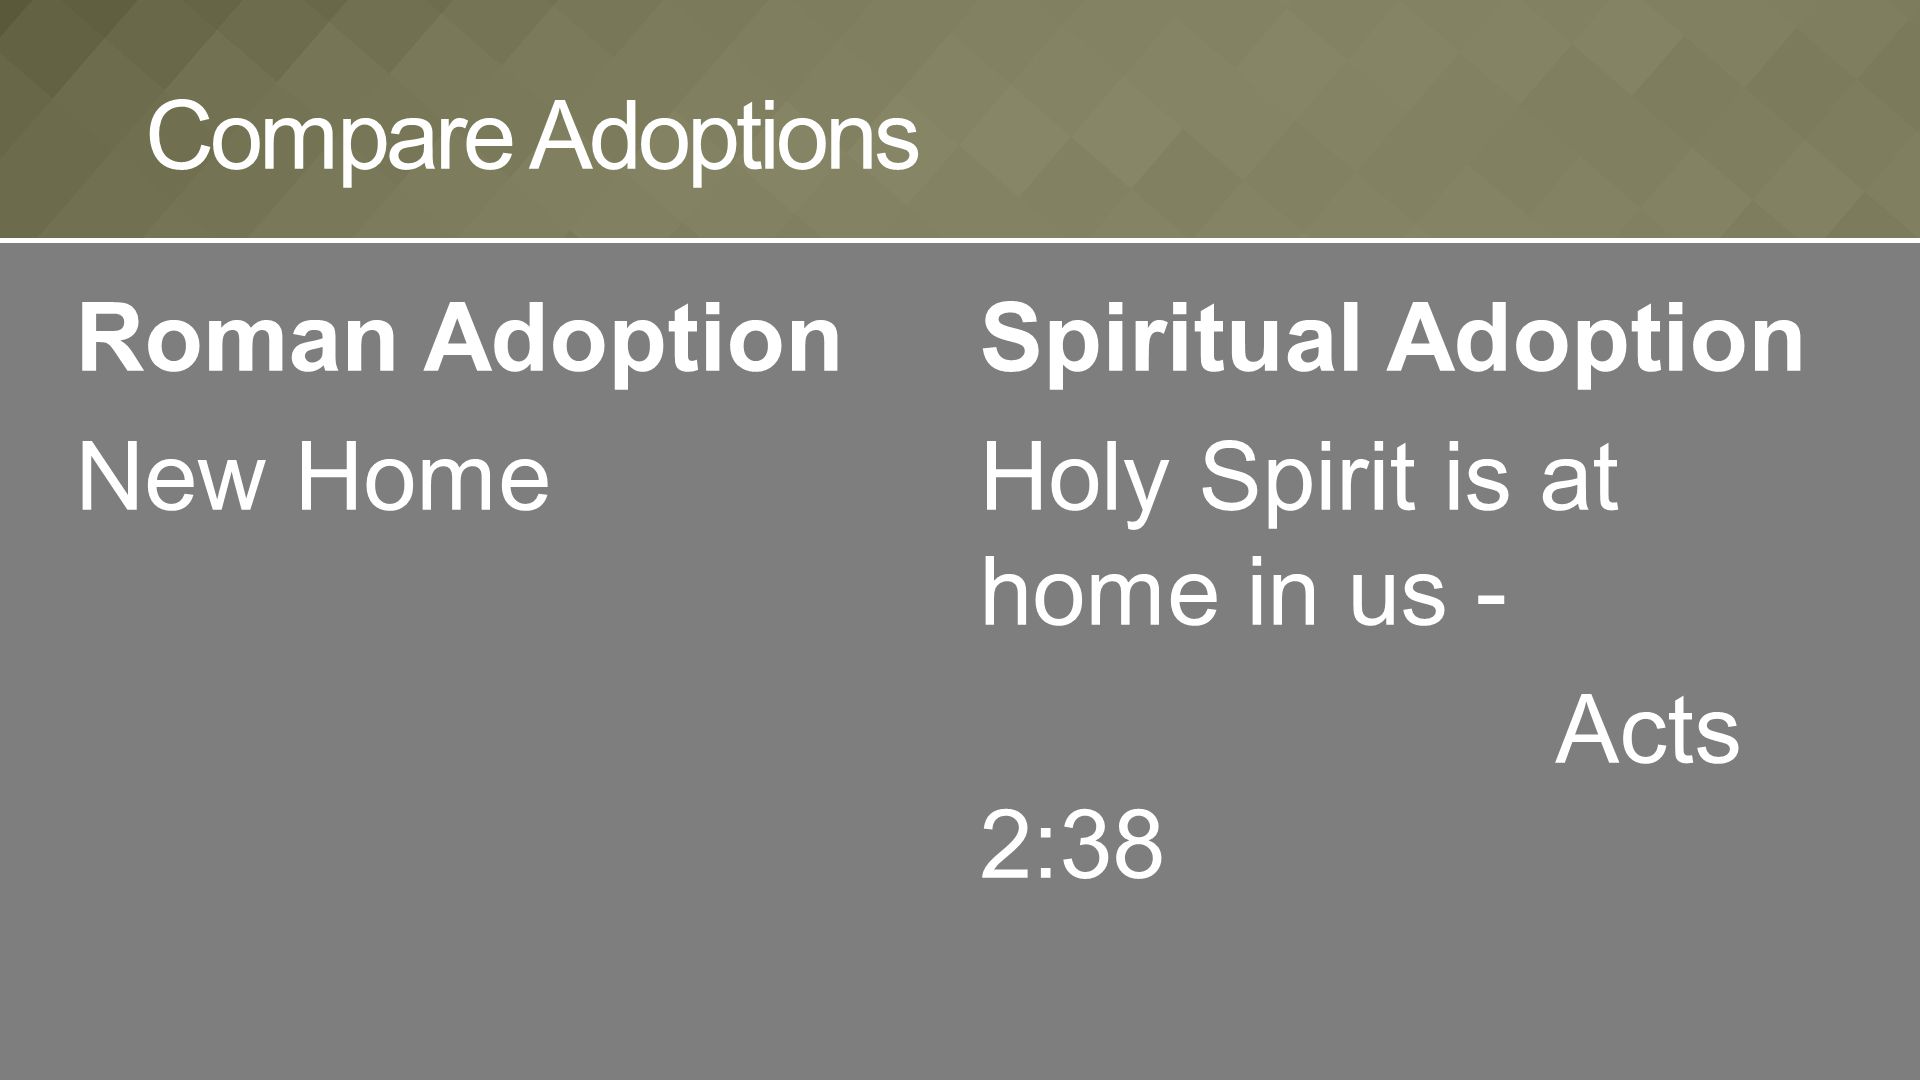 Roman Adoption New Home Compare Adoptions Spiritual Adoption Holy Spirit is at home in us - Acts 2:38